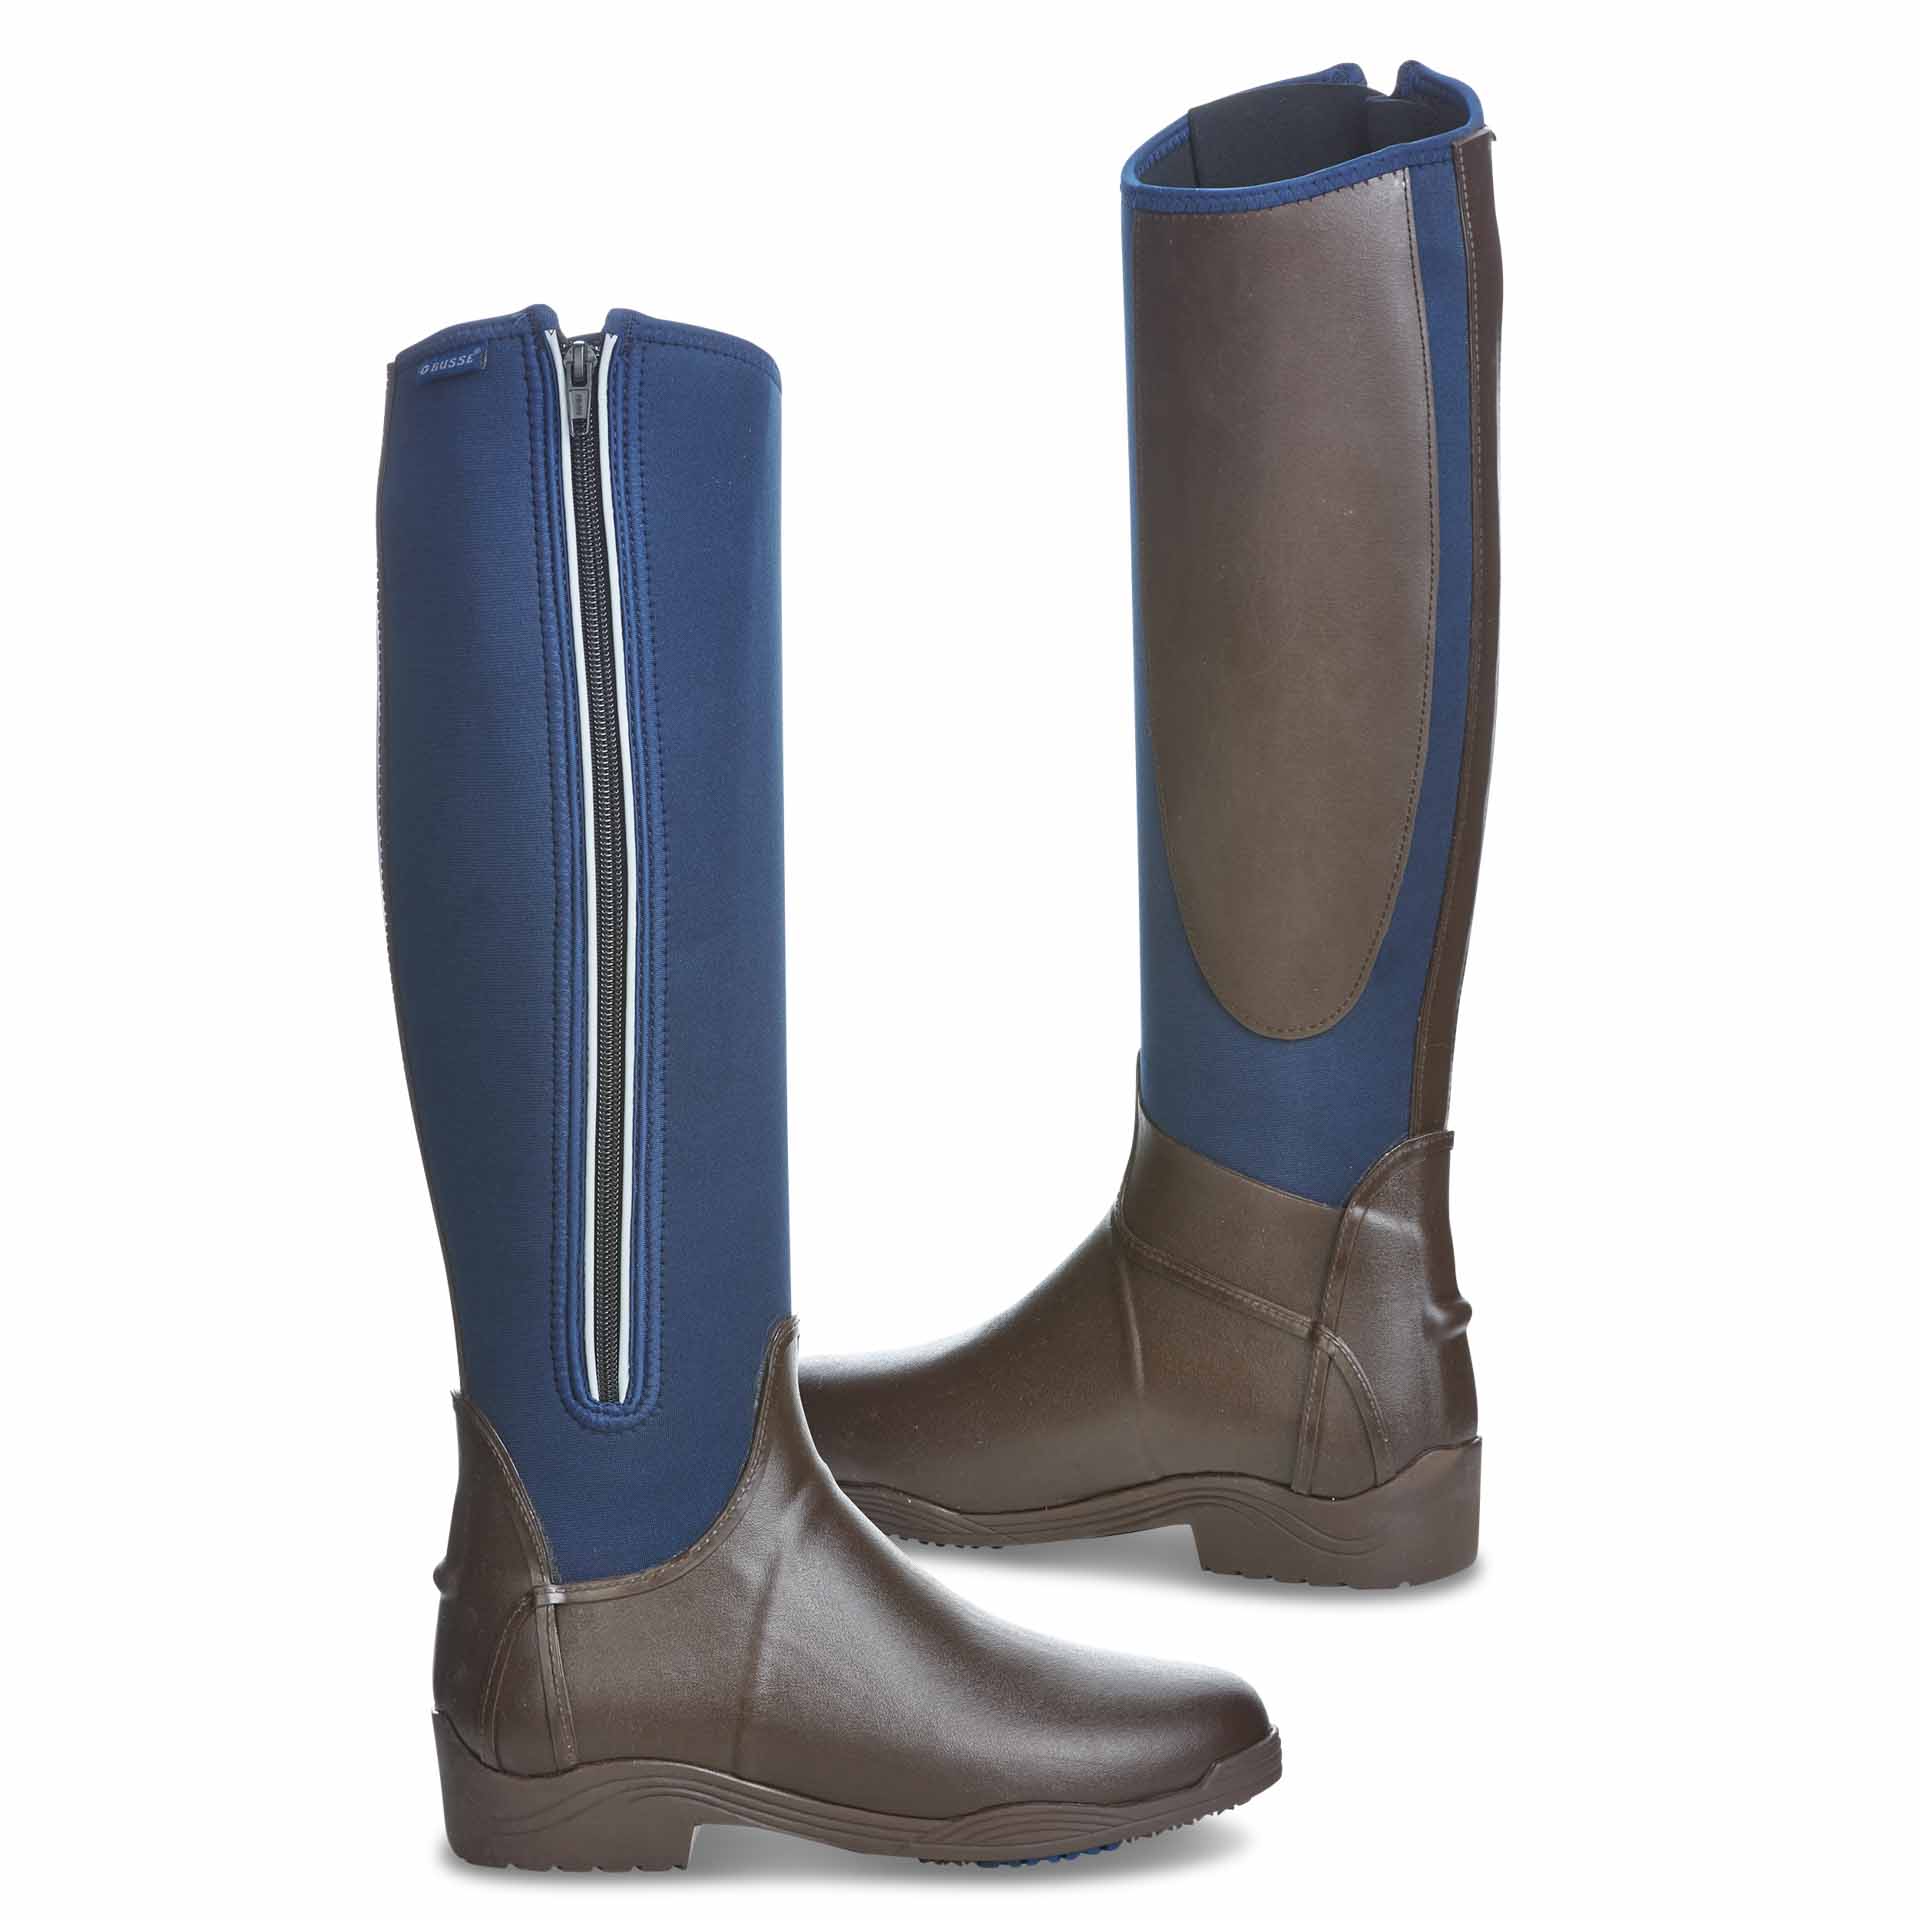 BUSSE Riding Mud Boots CALGARY, brown/navy 36 nn